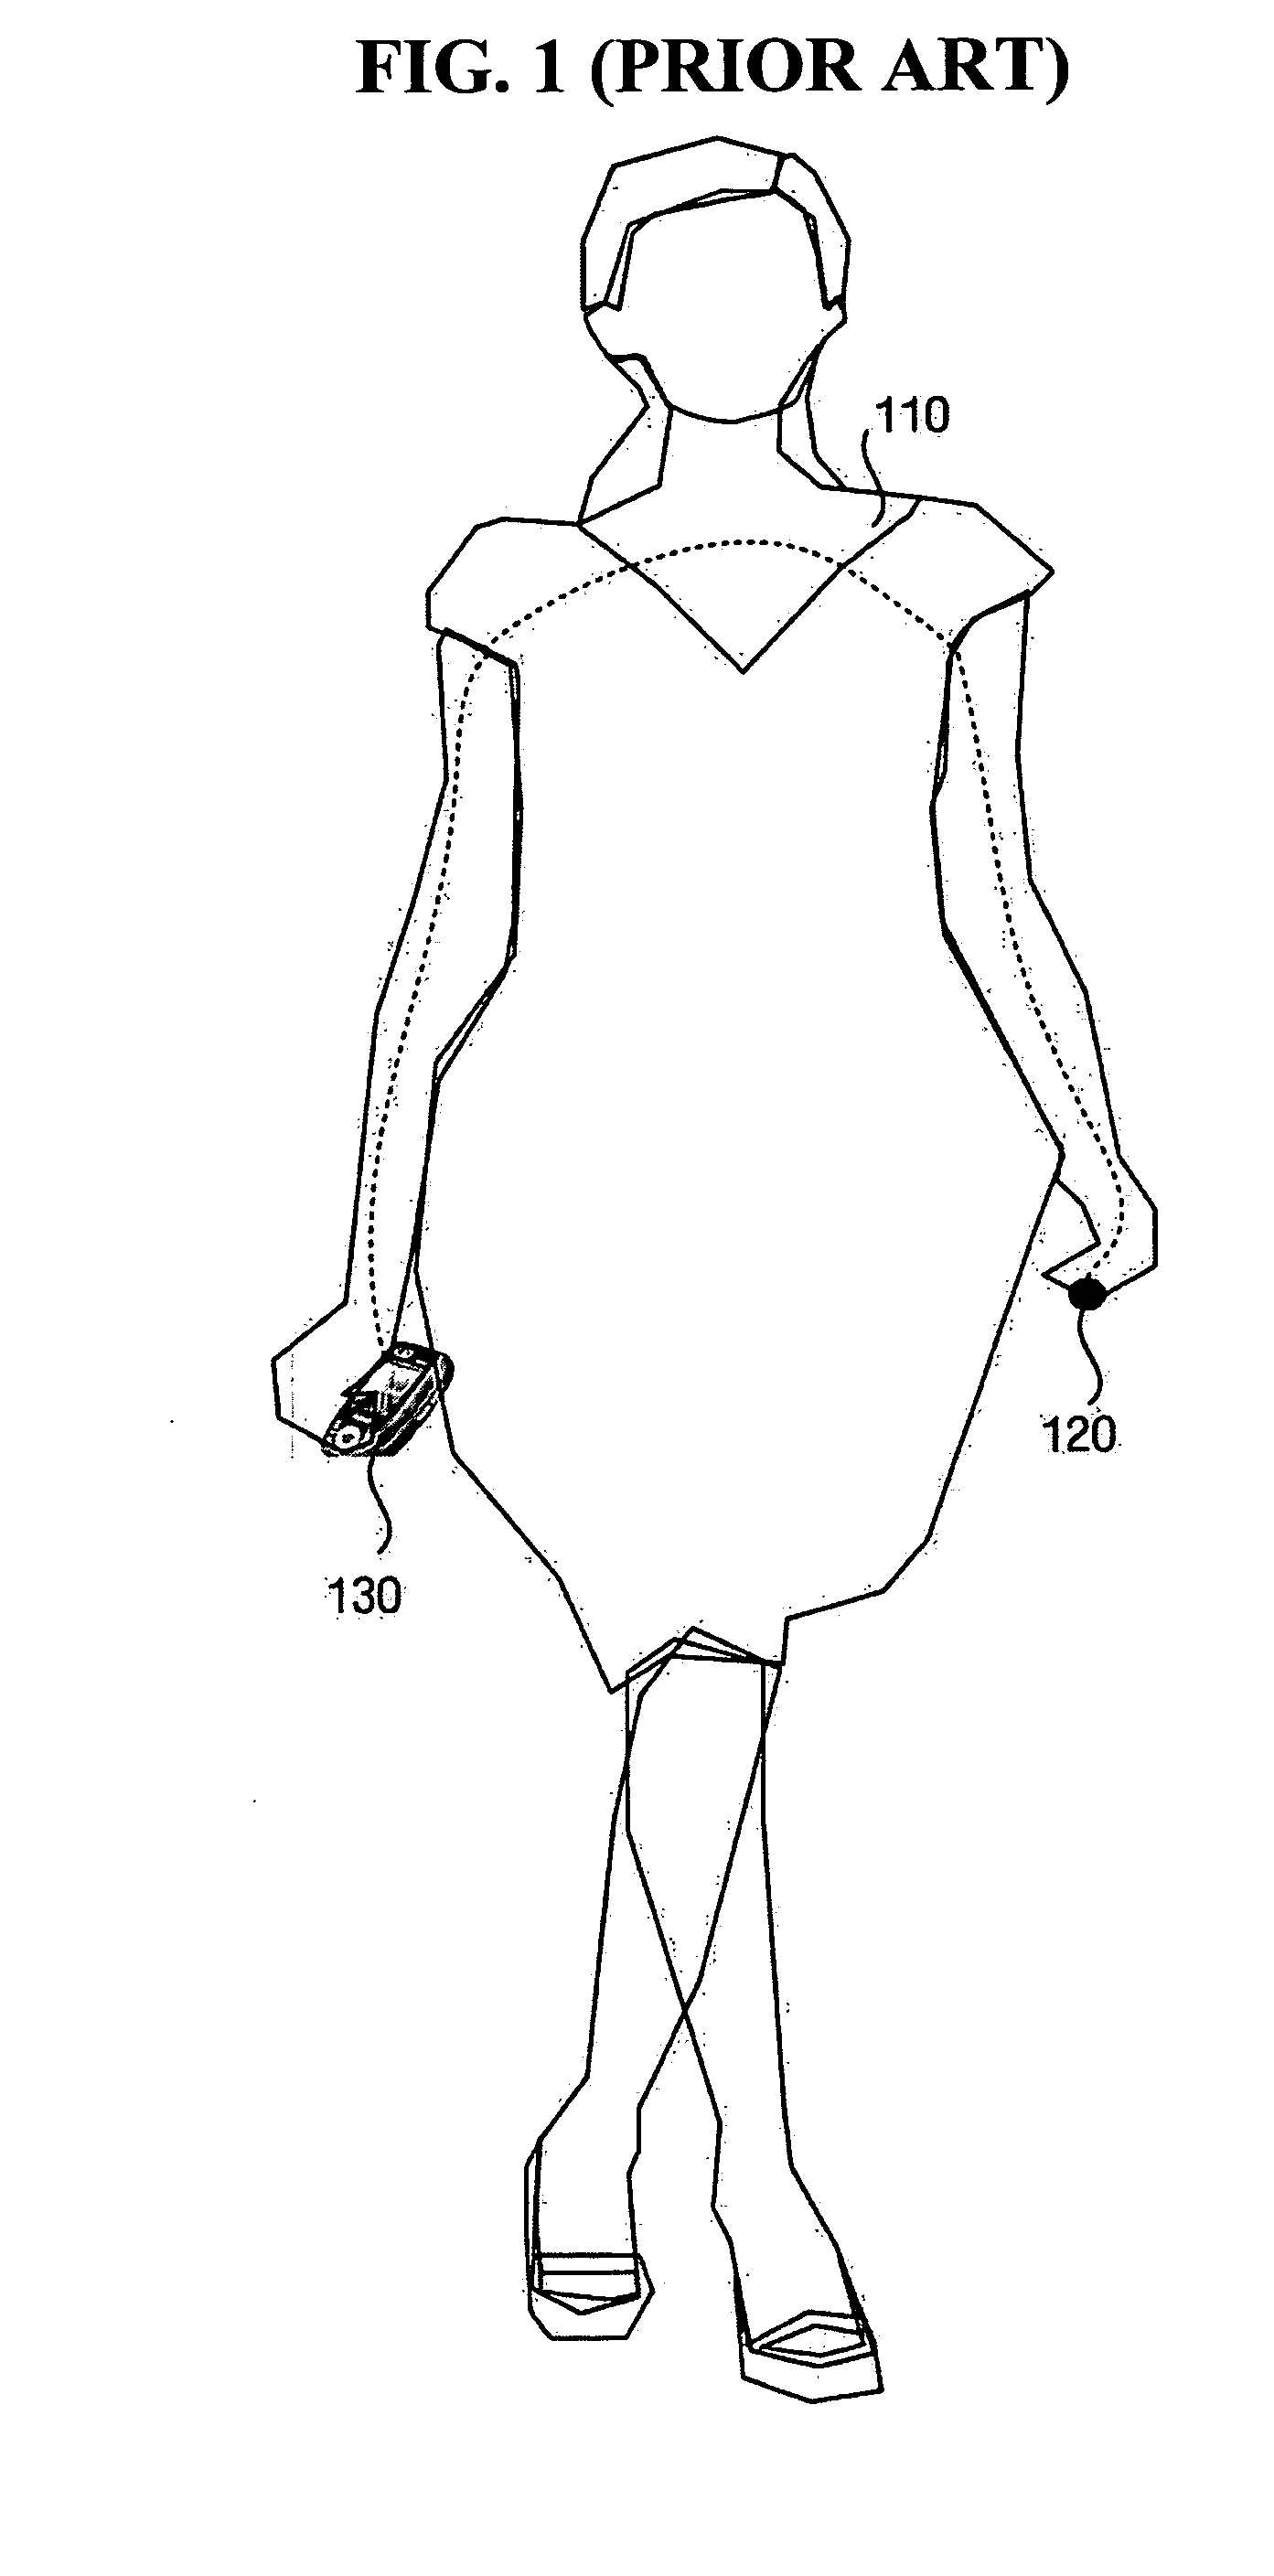 System and method for human body communication